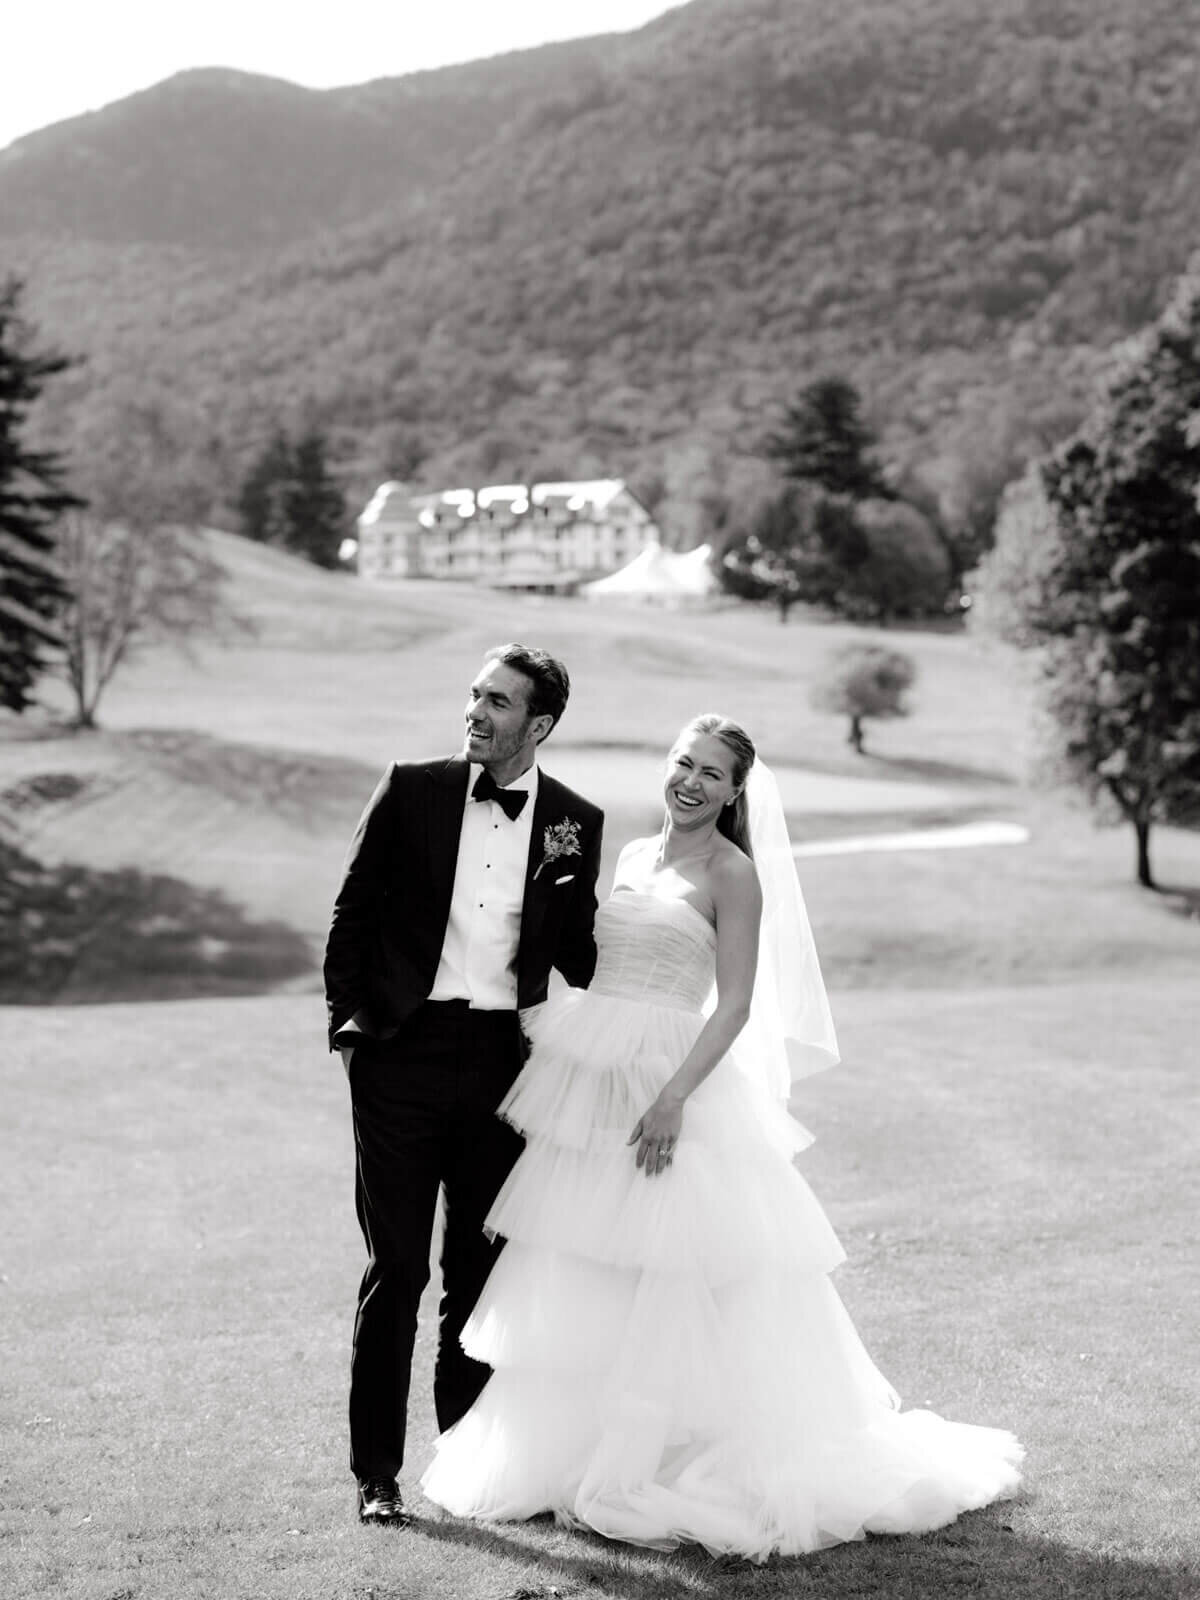 The bride is smiling at the camera, with the groom beside her, at The Ausable Club's golf course, NY. Image by Jenny Fu Studio.